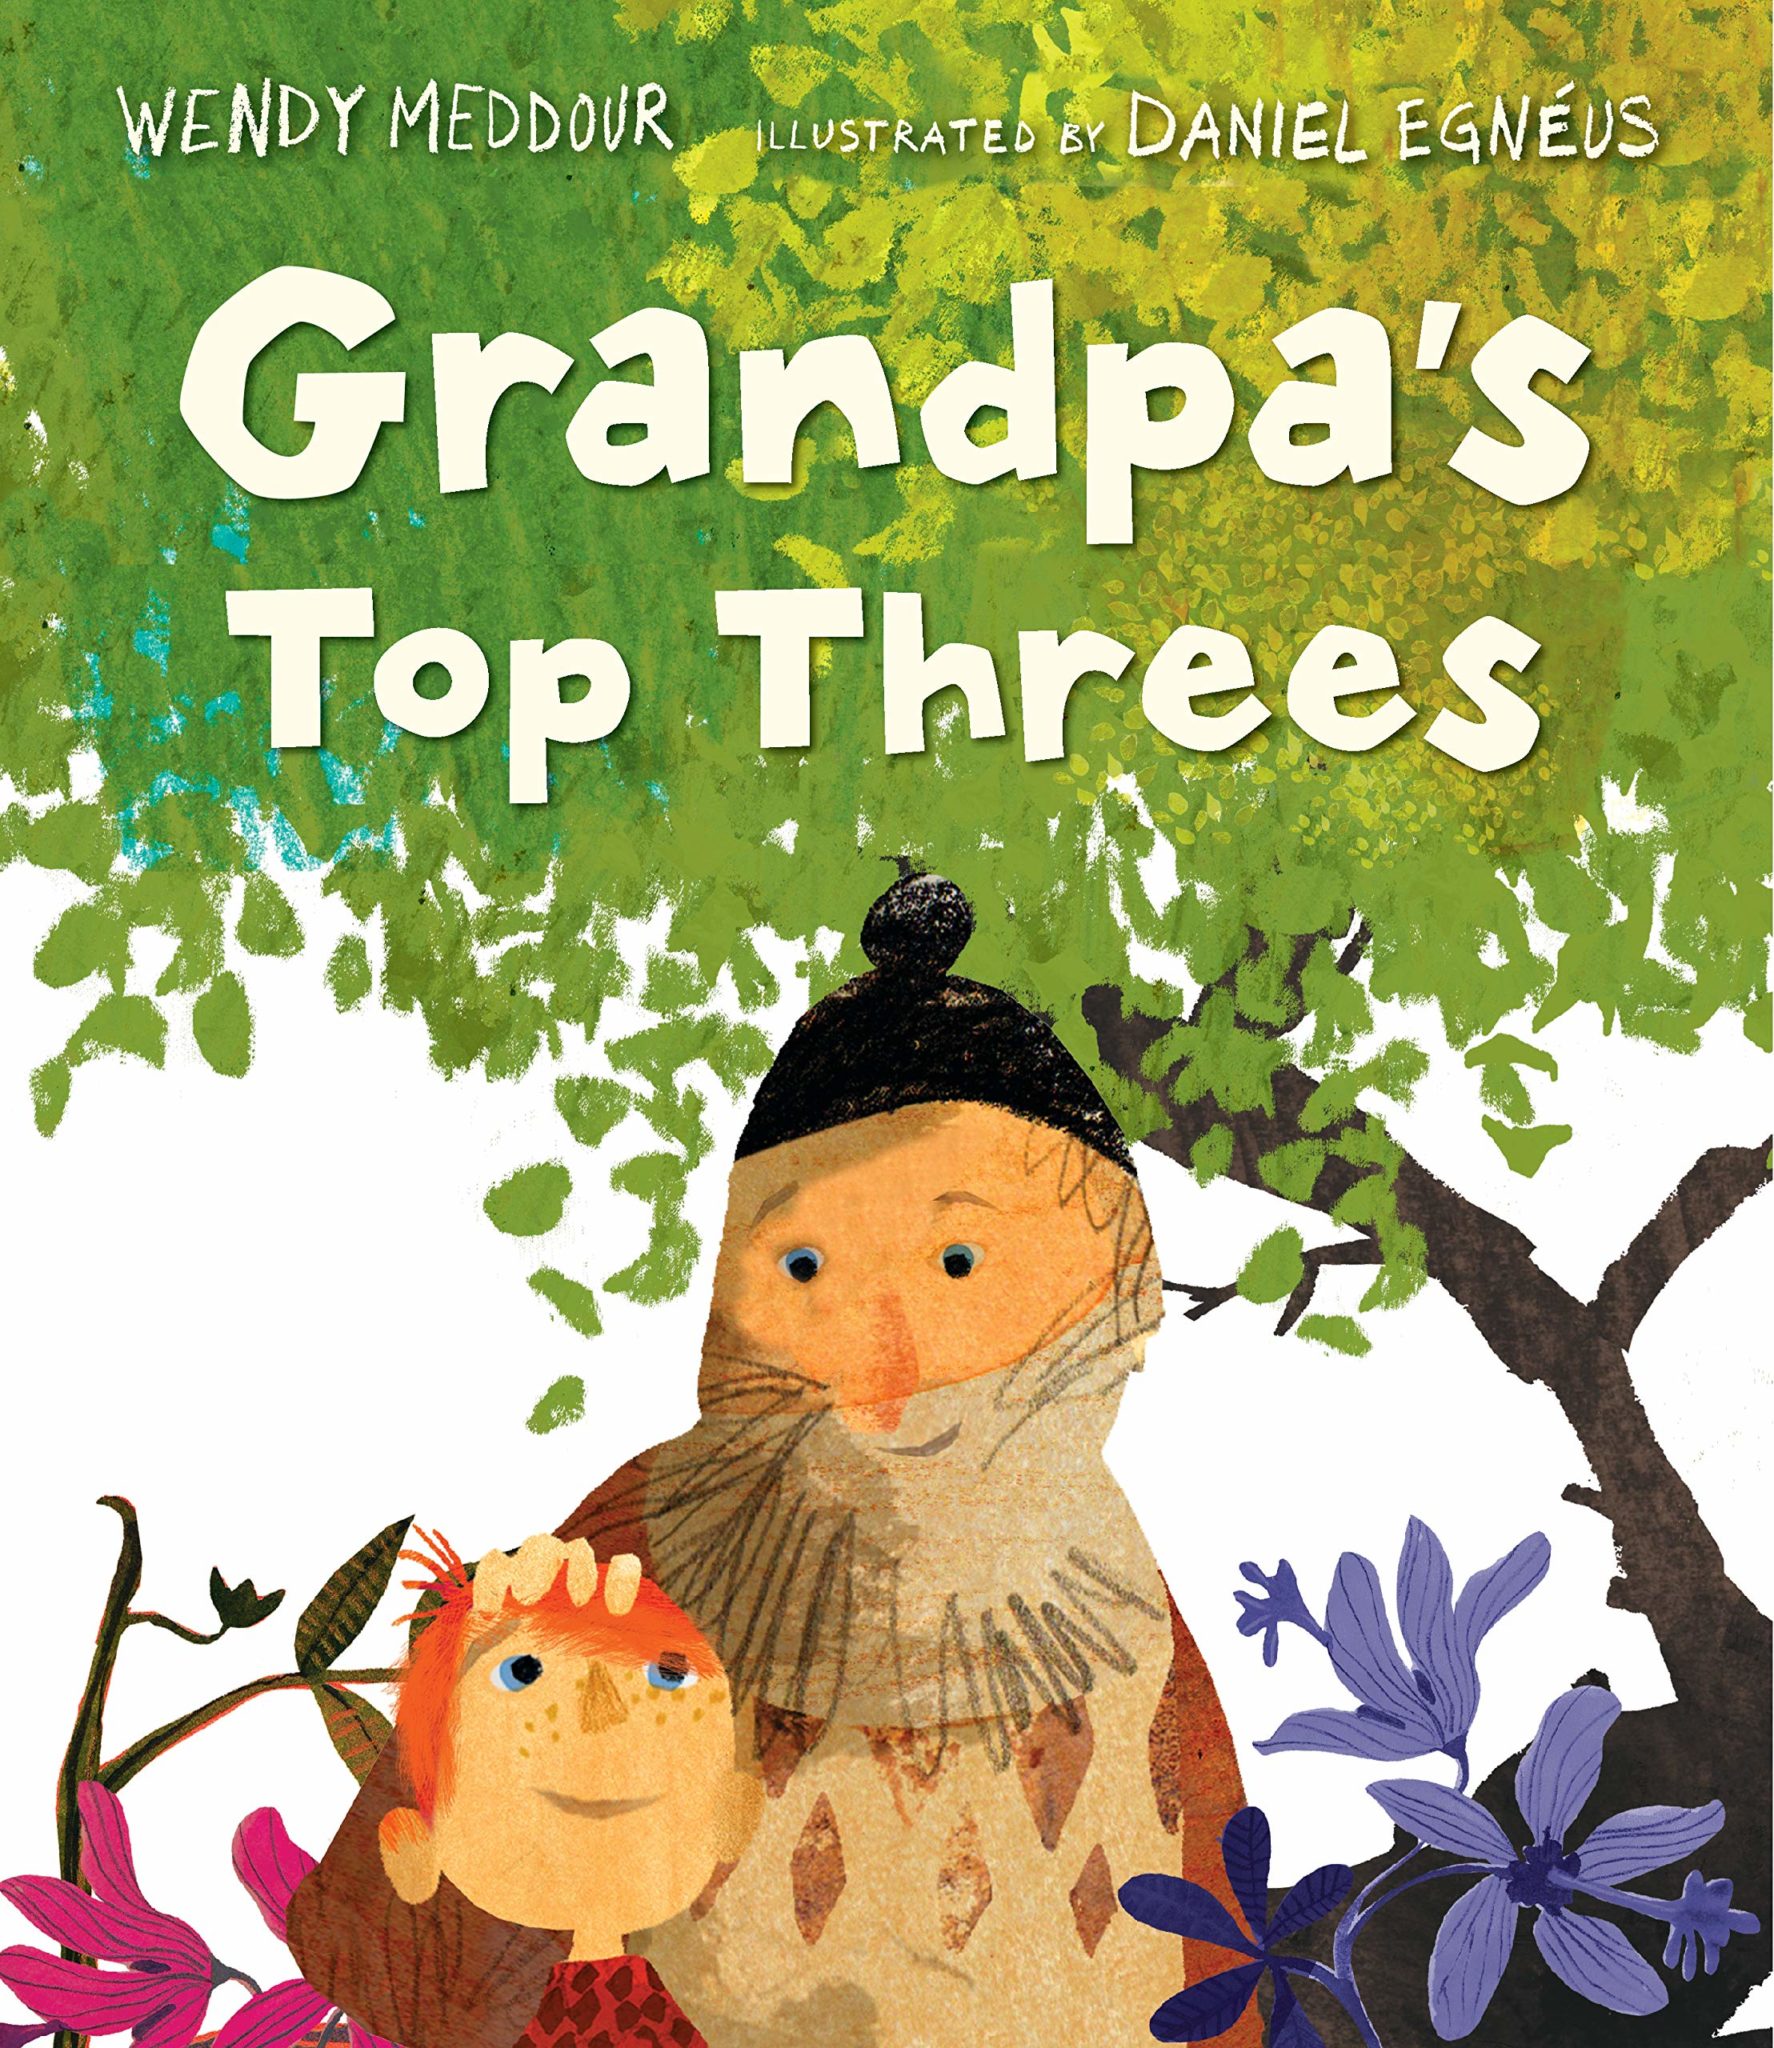 The cover of the picture book "Grandpa's Top Threes" features a small, smiling boy looking up at his scraggly-bearded grandfather. They are standing beneath a tree and surrounded by flowers.